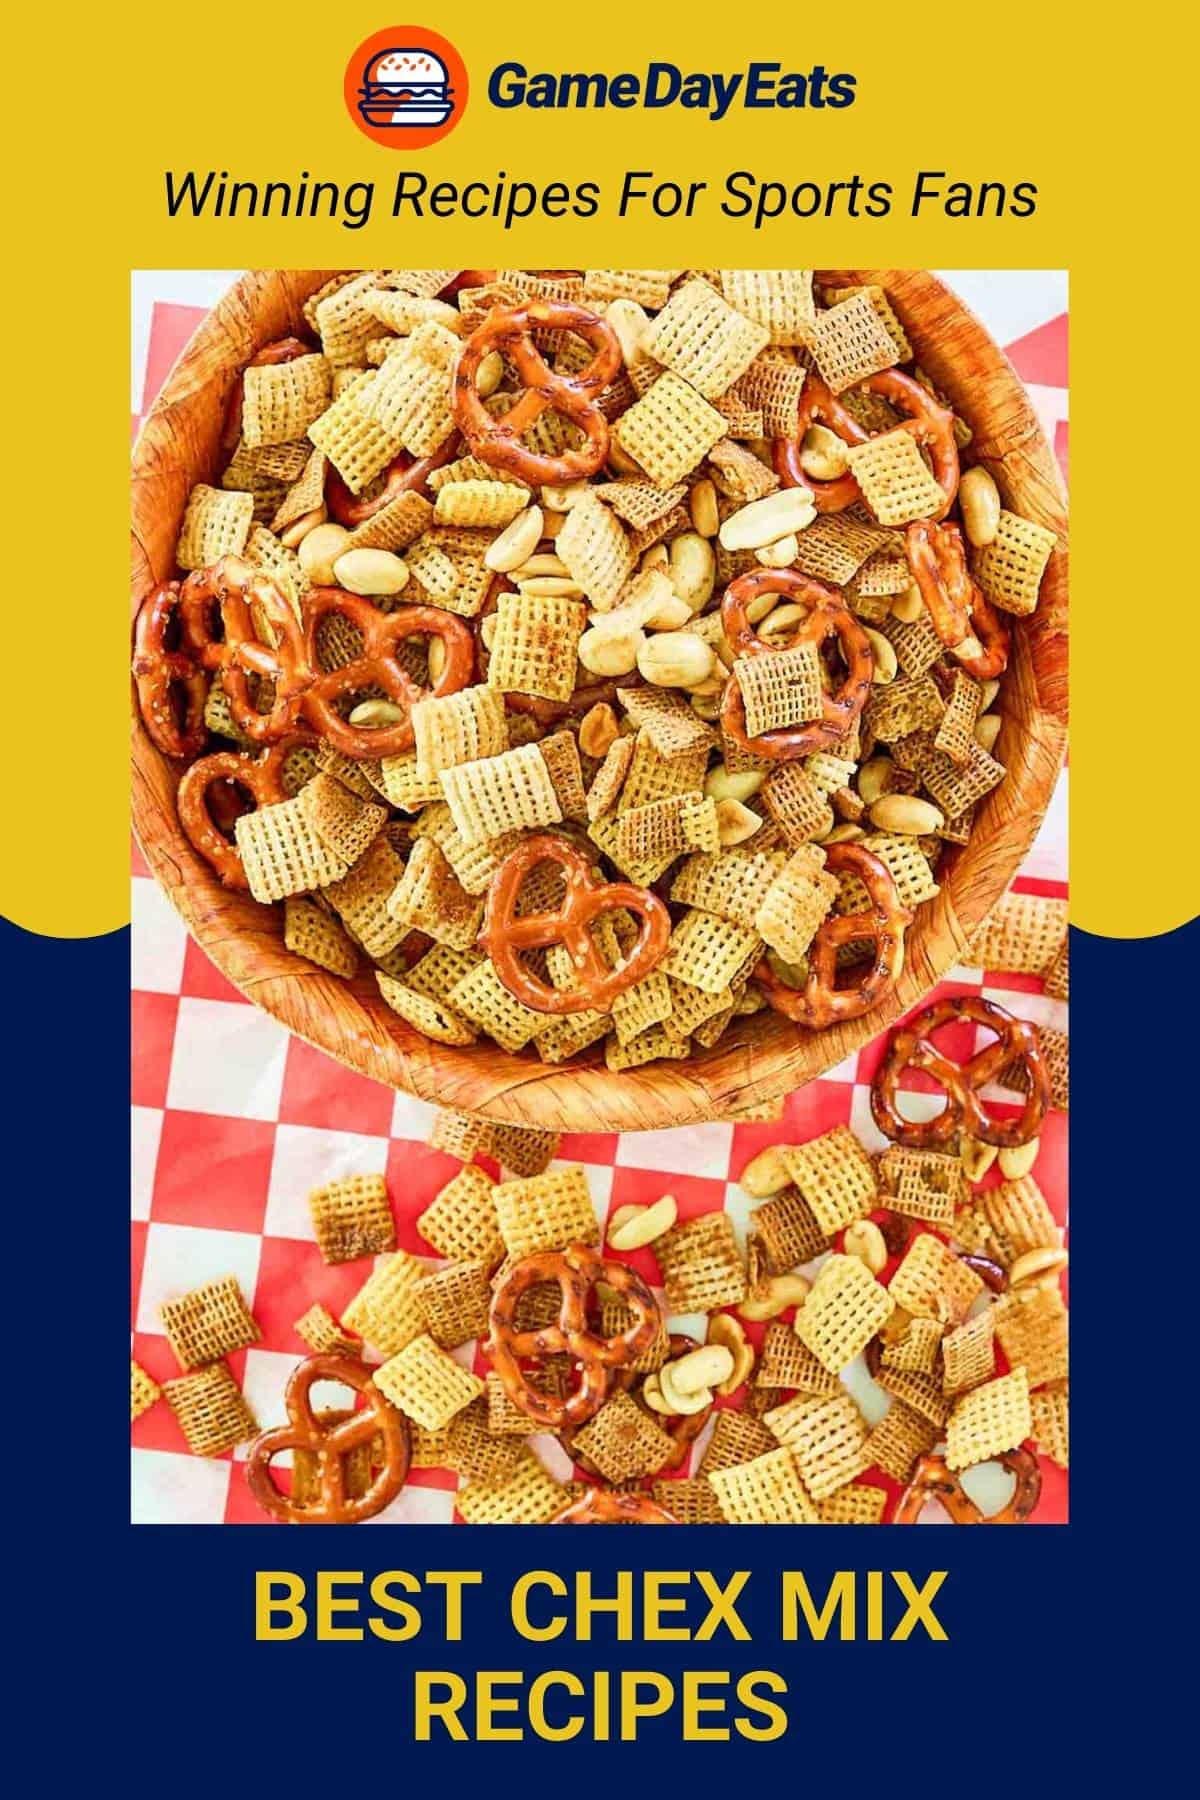 Chex mix in a wood bowl and scattered on parchment paper.